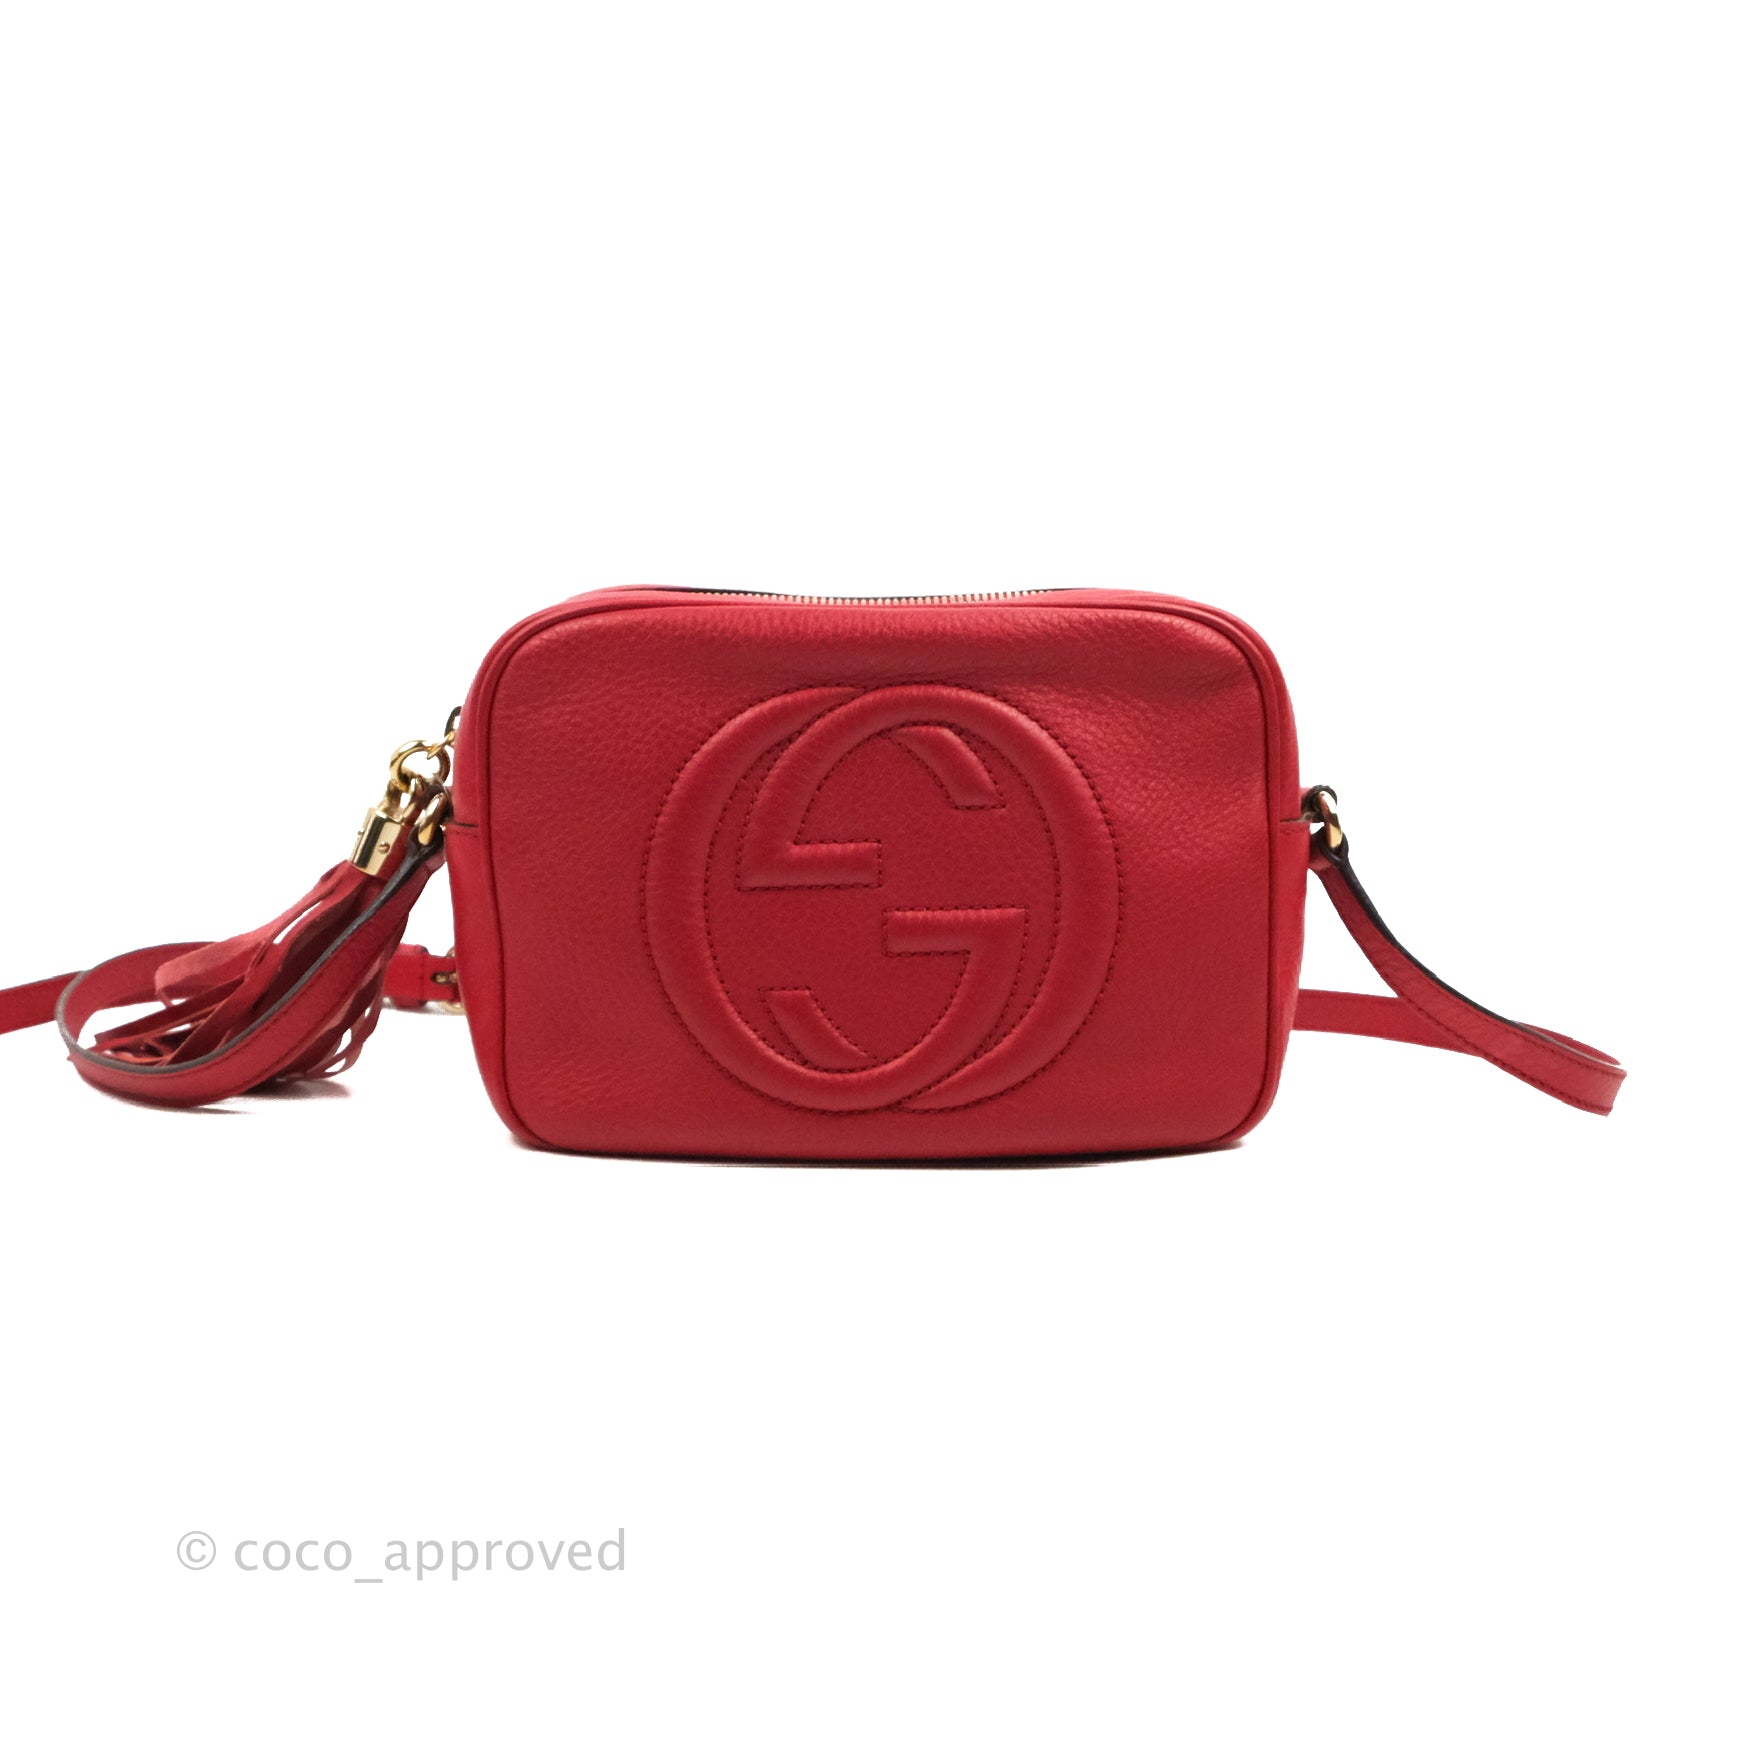 GUCCI Soho Small Leather Disco Bag in Red